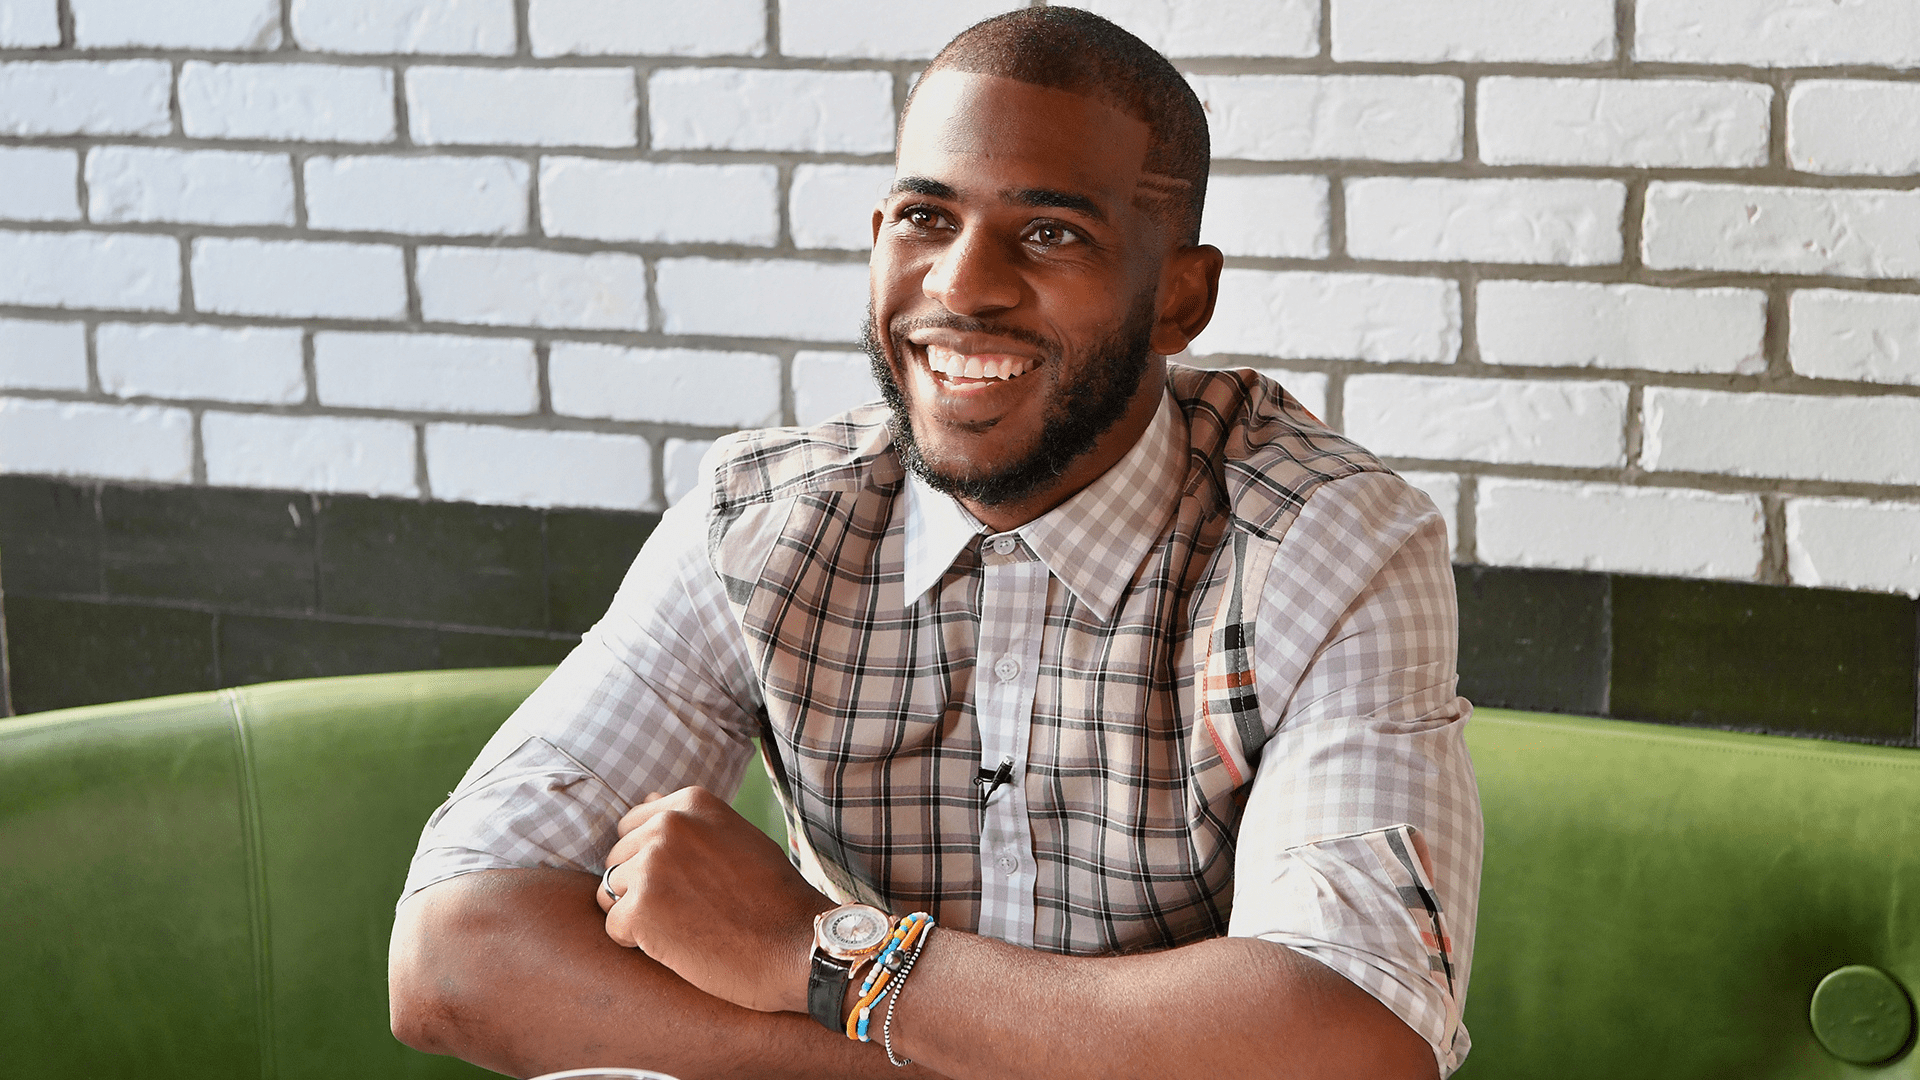 Chris Paul’s 4 Best Investments Reveal His Business Savvy